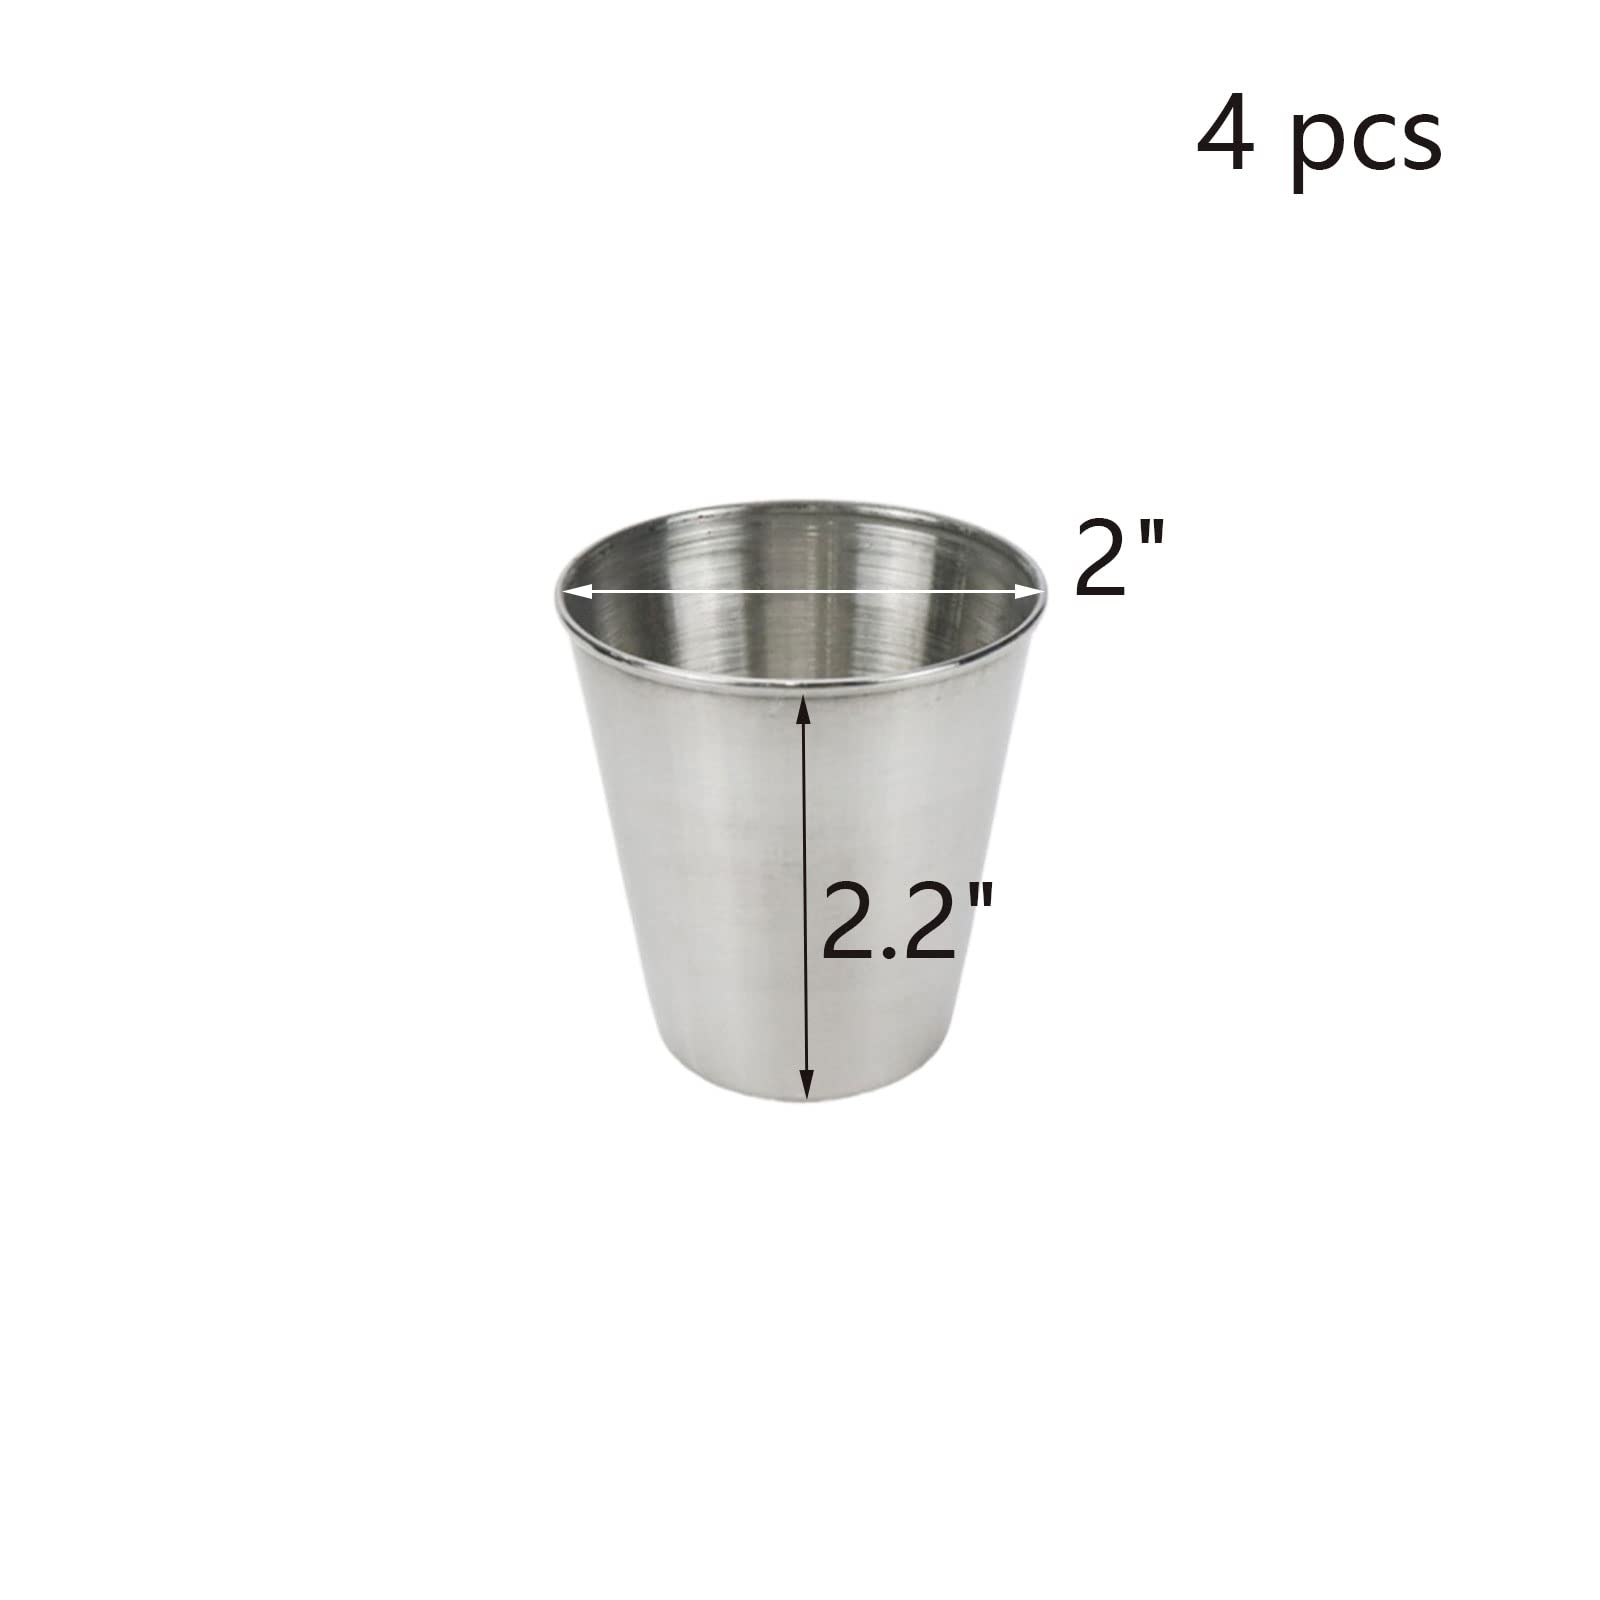 Wealrit 4 pcs 70ml Stainless Steel Shot Glasses with Case,Unbreakable Shot Glasses,Stainless Steel Shot Cups with 1 pcs Black Leather Case,2.5Oz